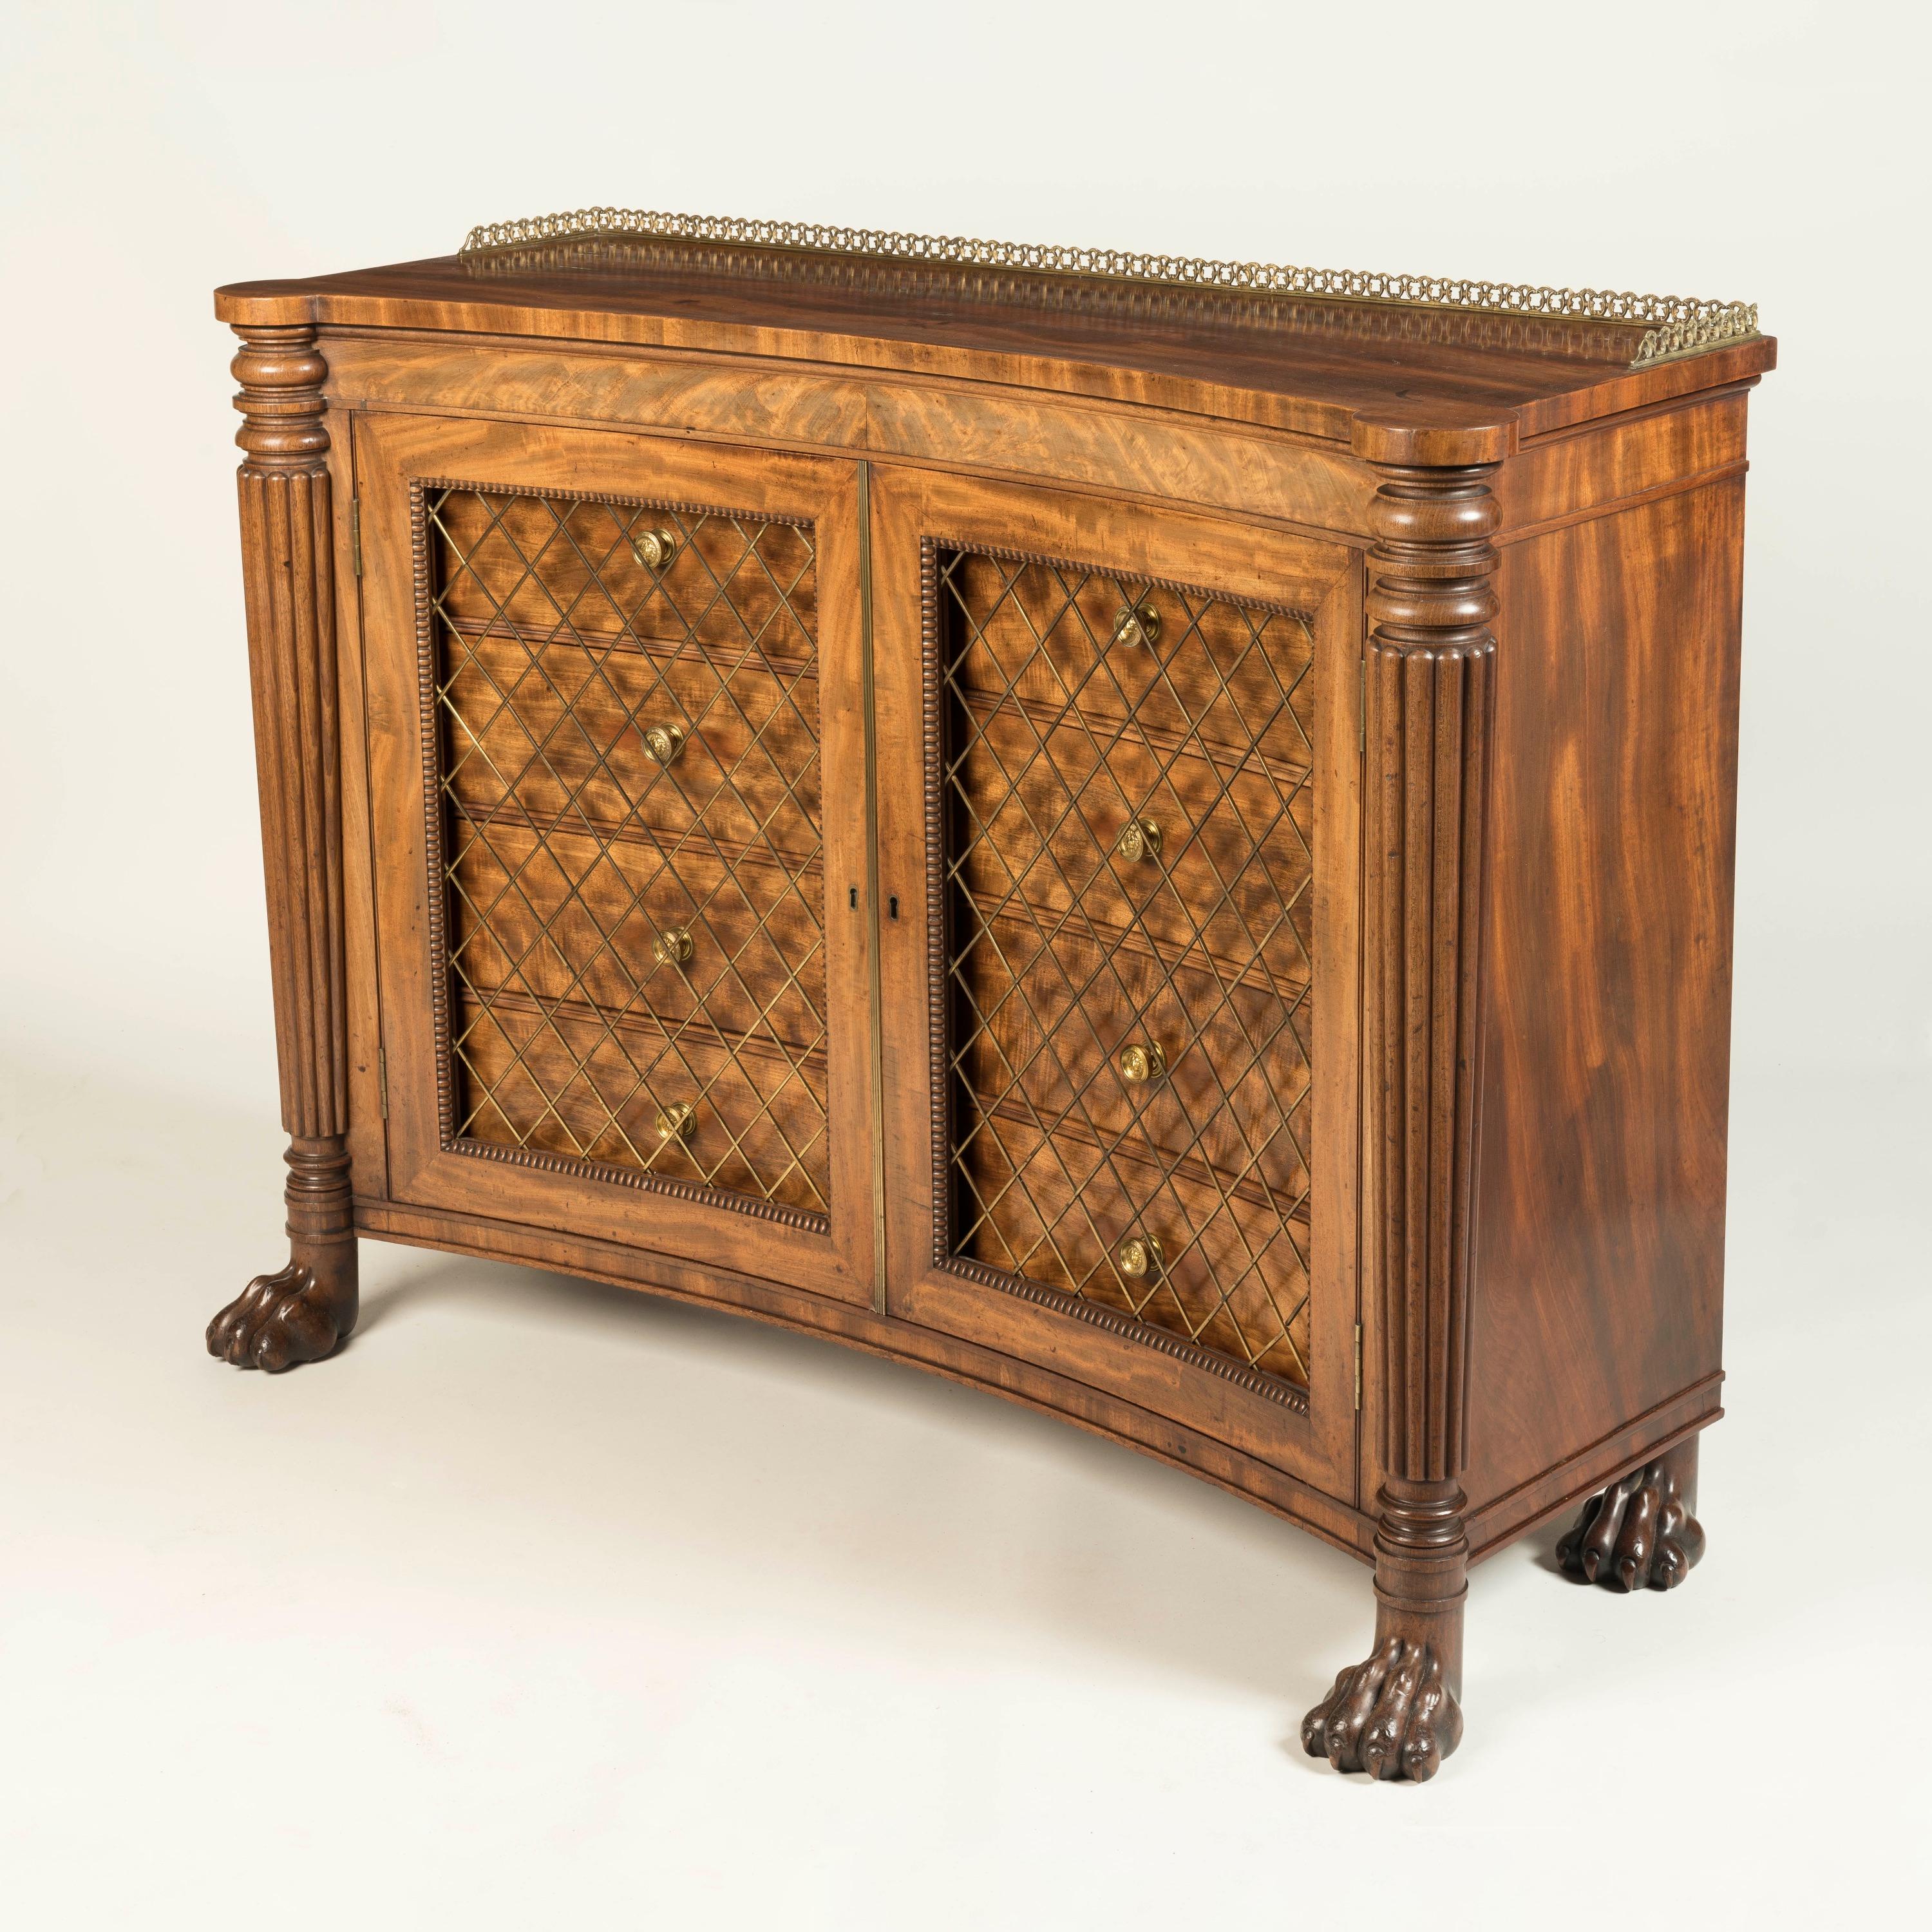 English Rare 19th Century Regency Concave Side Cabinet of Mahogany with Brass Accents For Sale